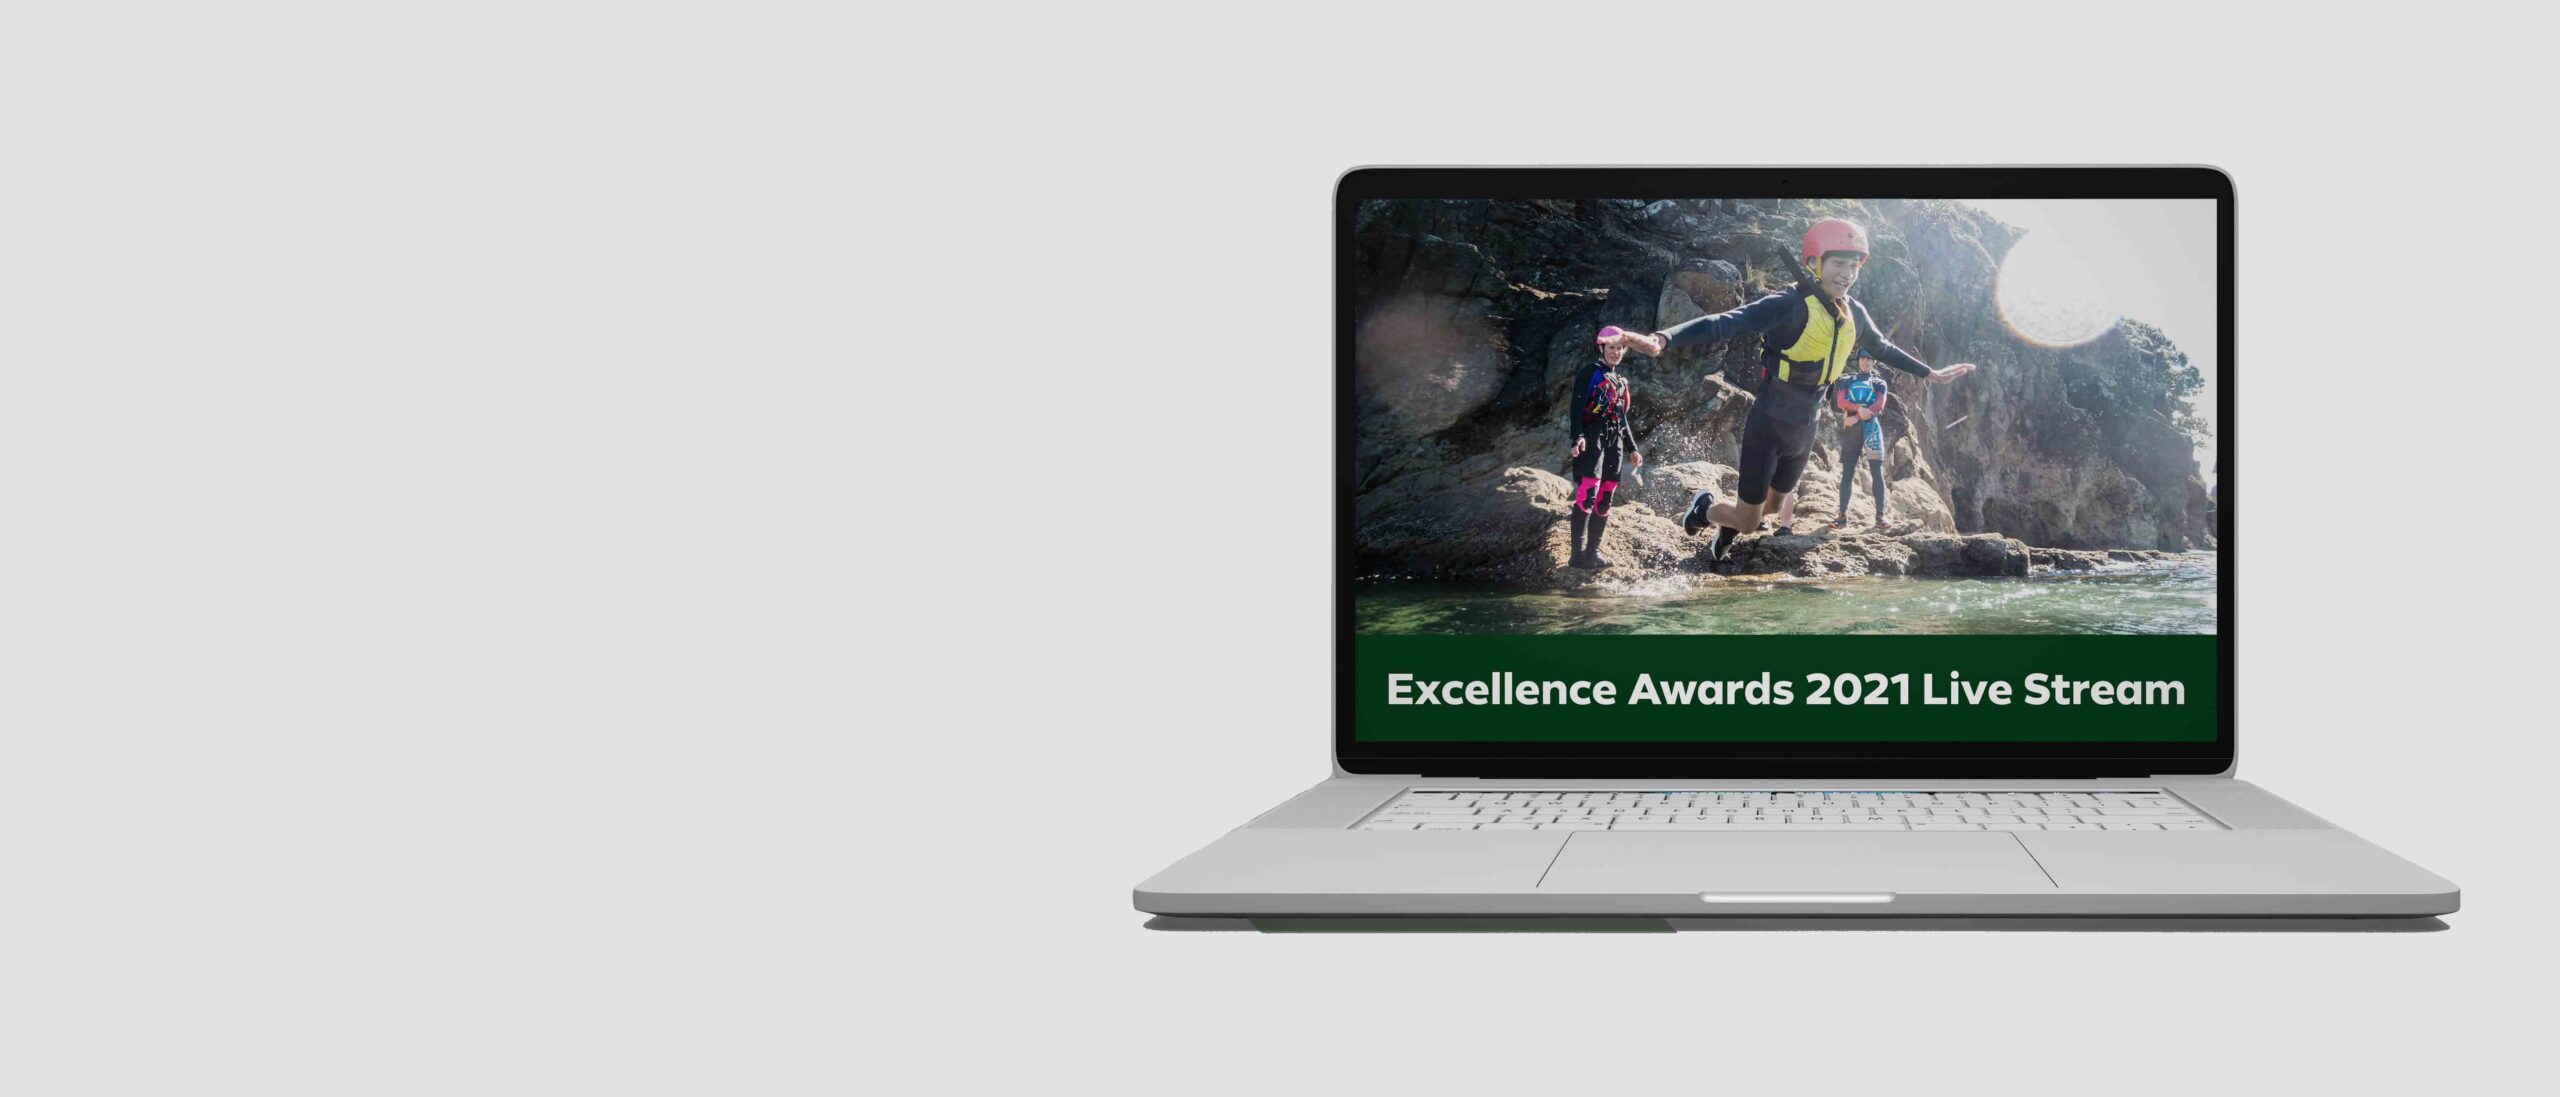 Excellence Awards Live Stream computer view